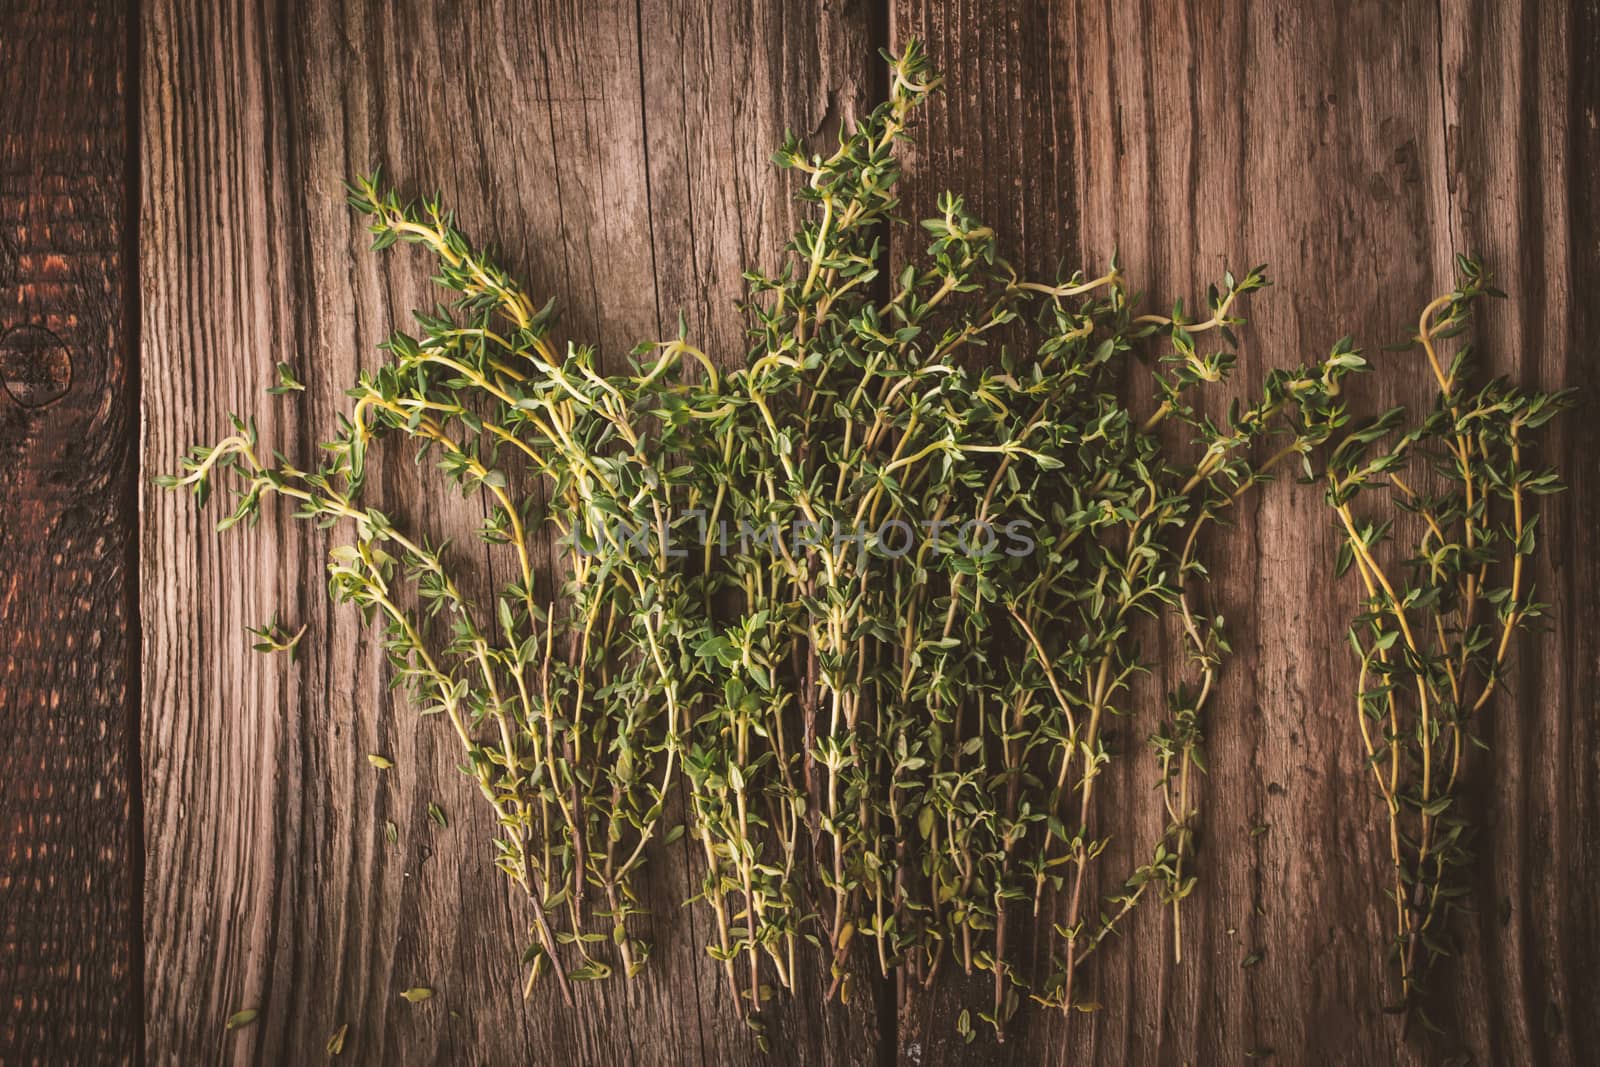 Thyme on the old wooden board horizontal